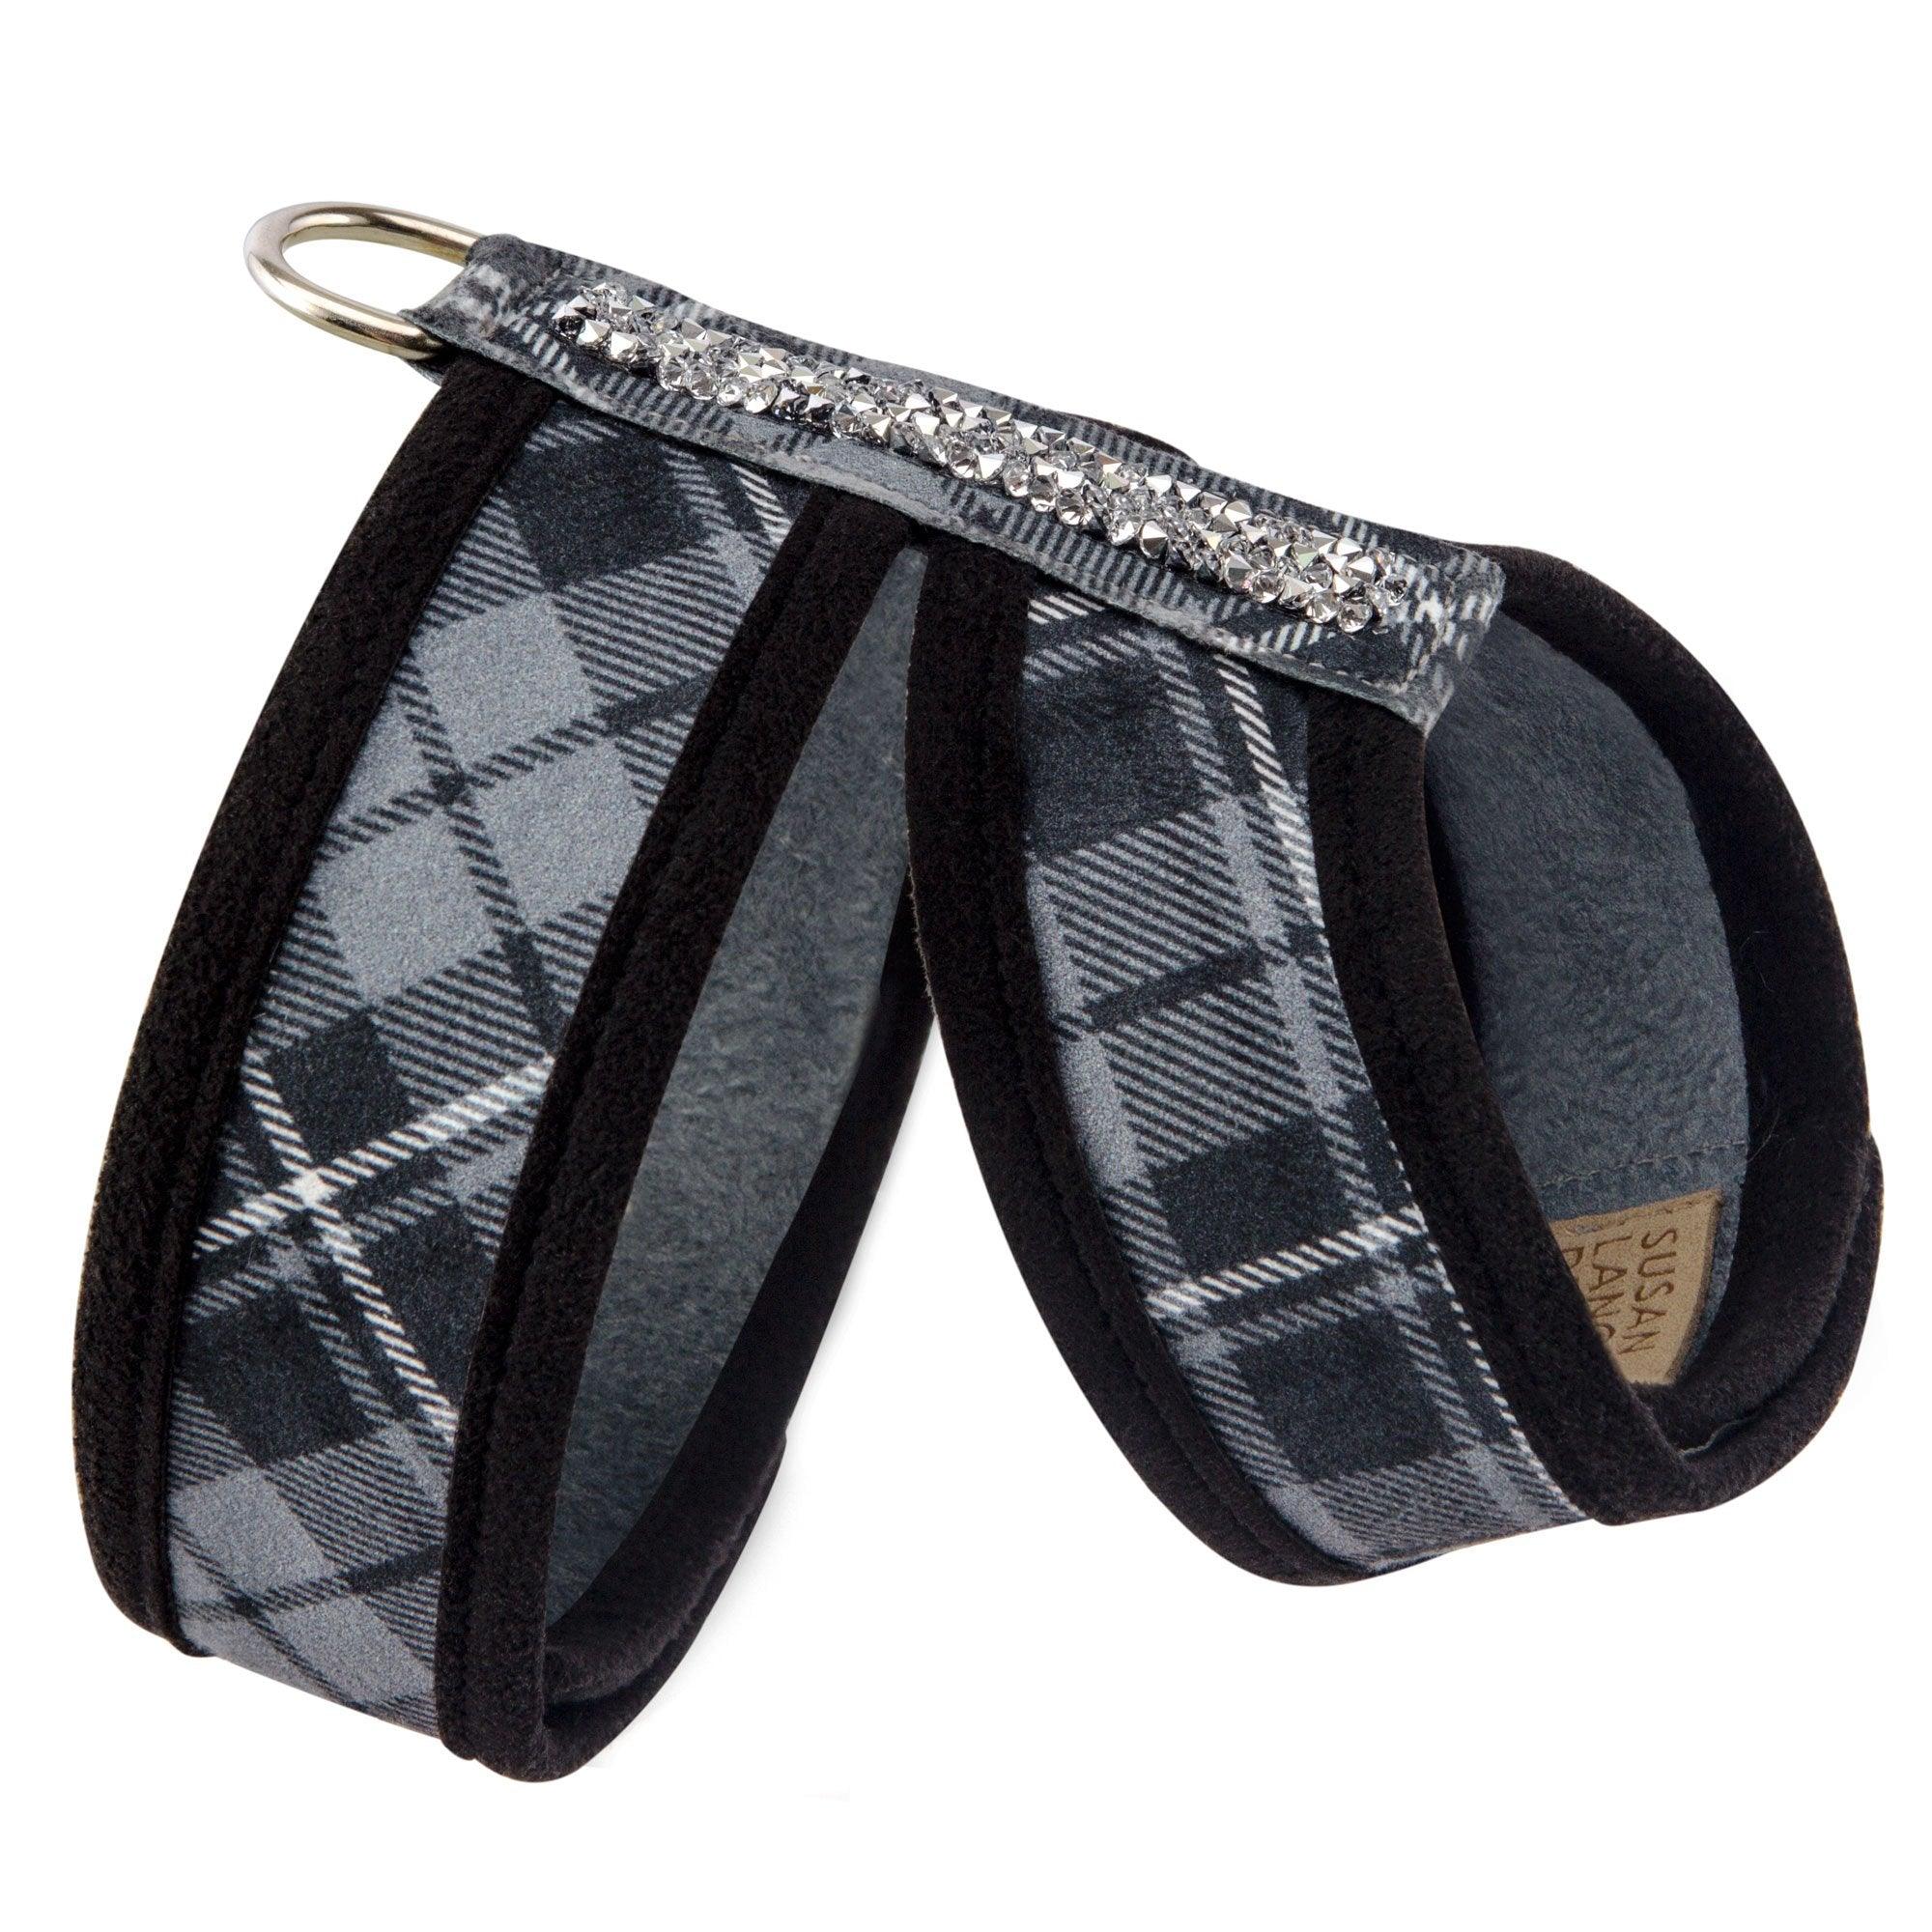 Scotty Tinkie Harness Charcoal Plaid - Rocky & Maggie's Pet Boutique and Salon